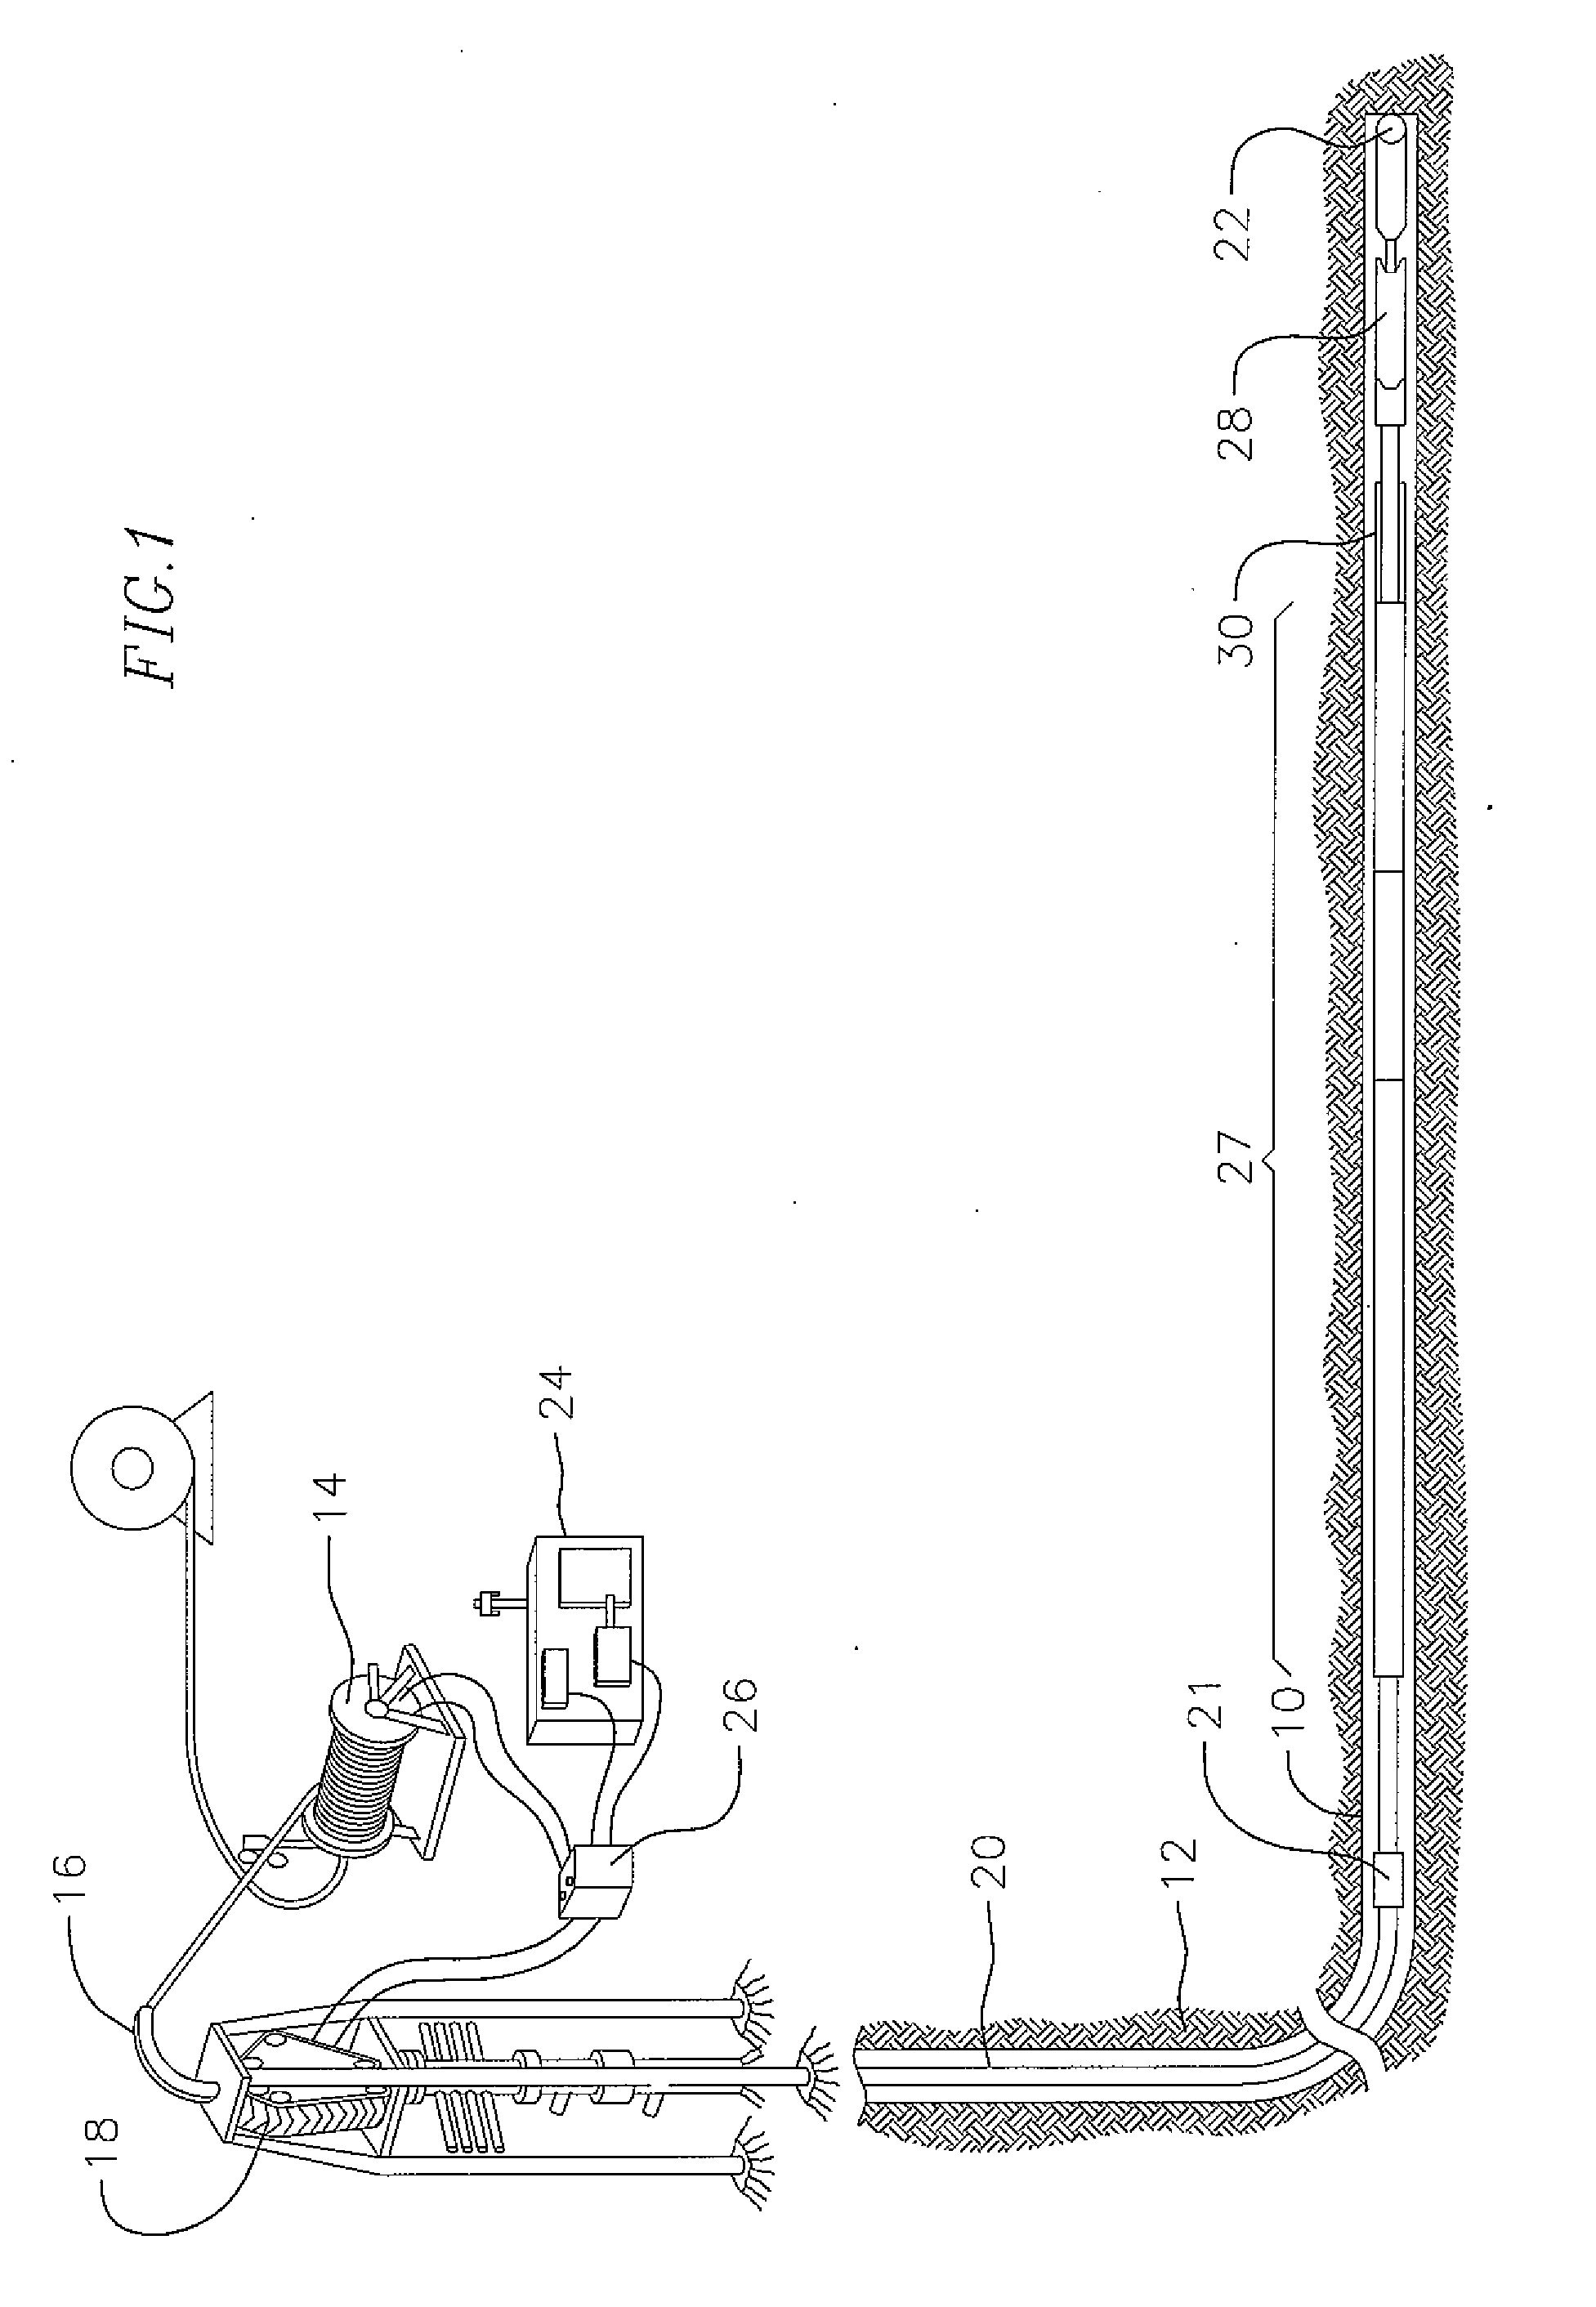 Electrical controller for Anti-stall tools for downhole drilling assemblies and method of drilling optimization by downhole devices